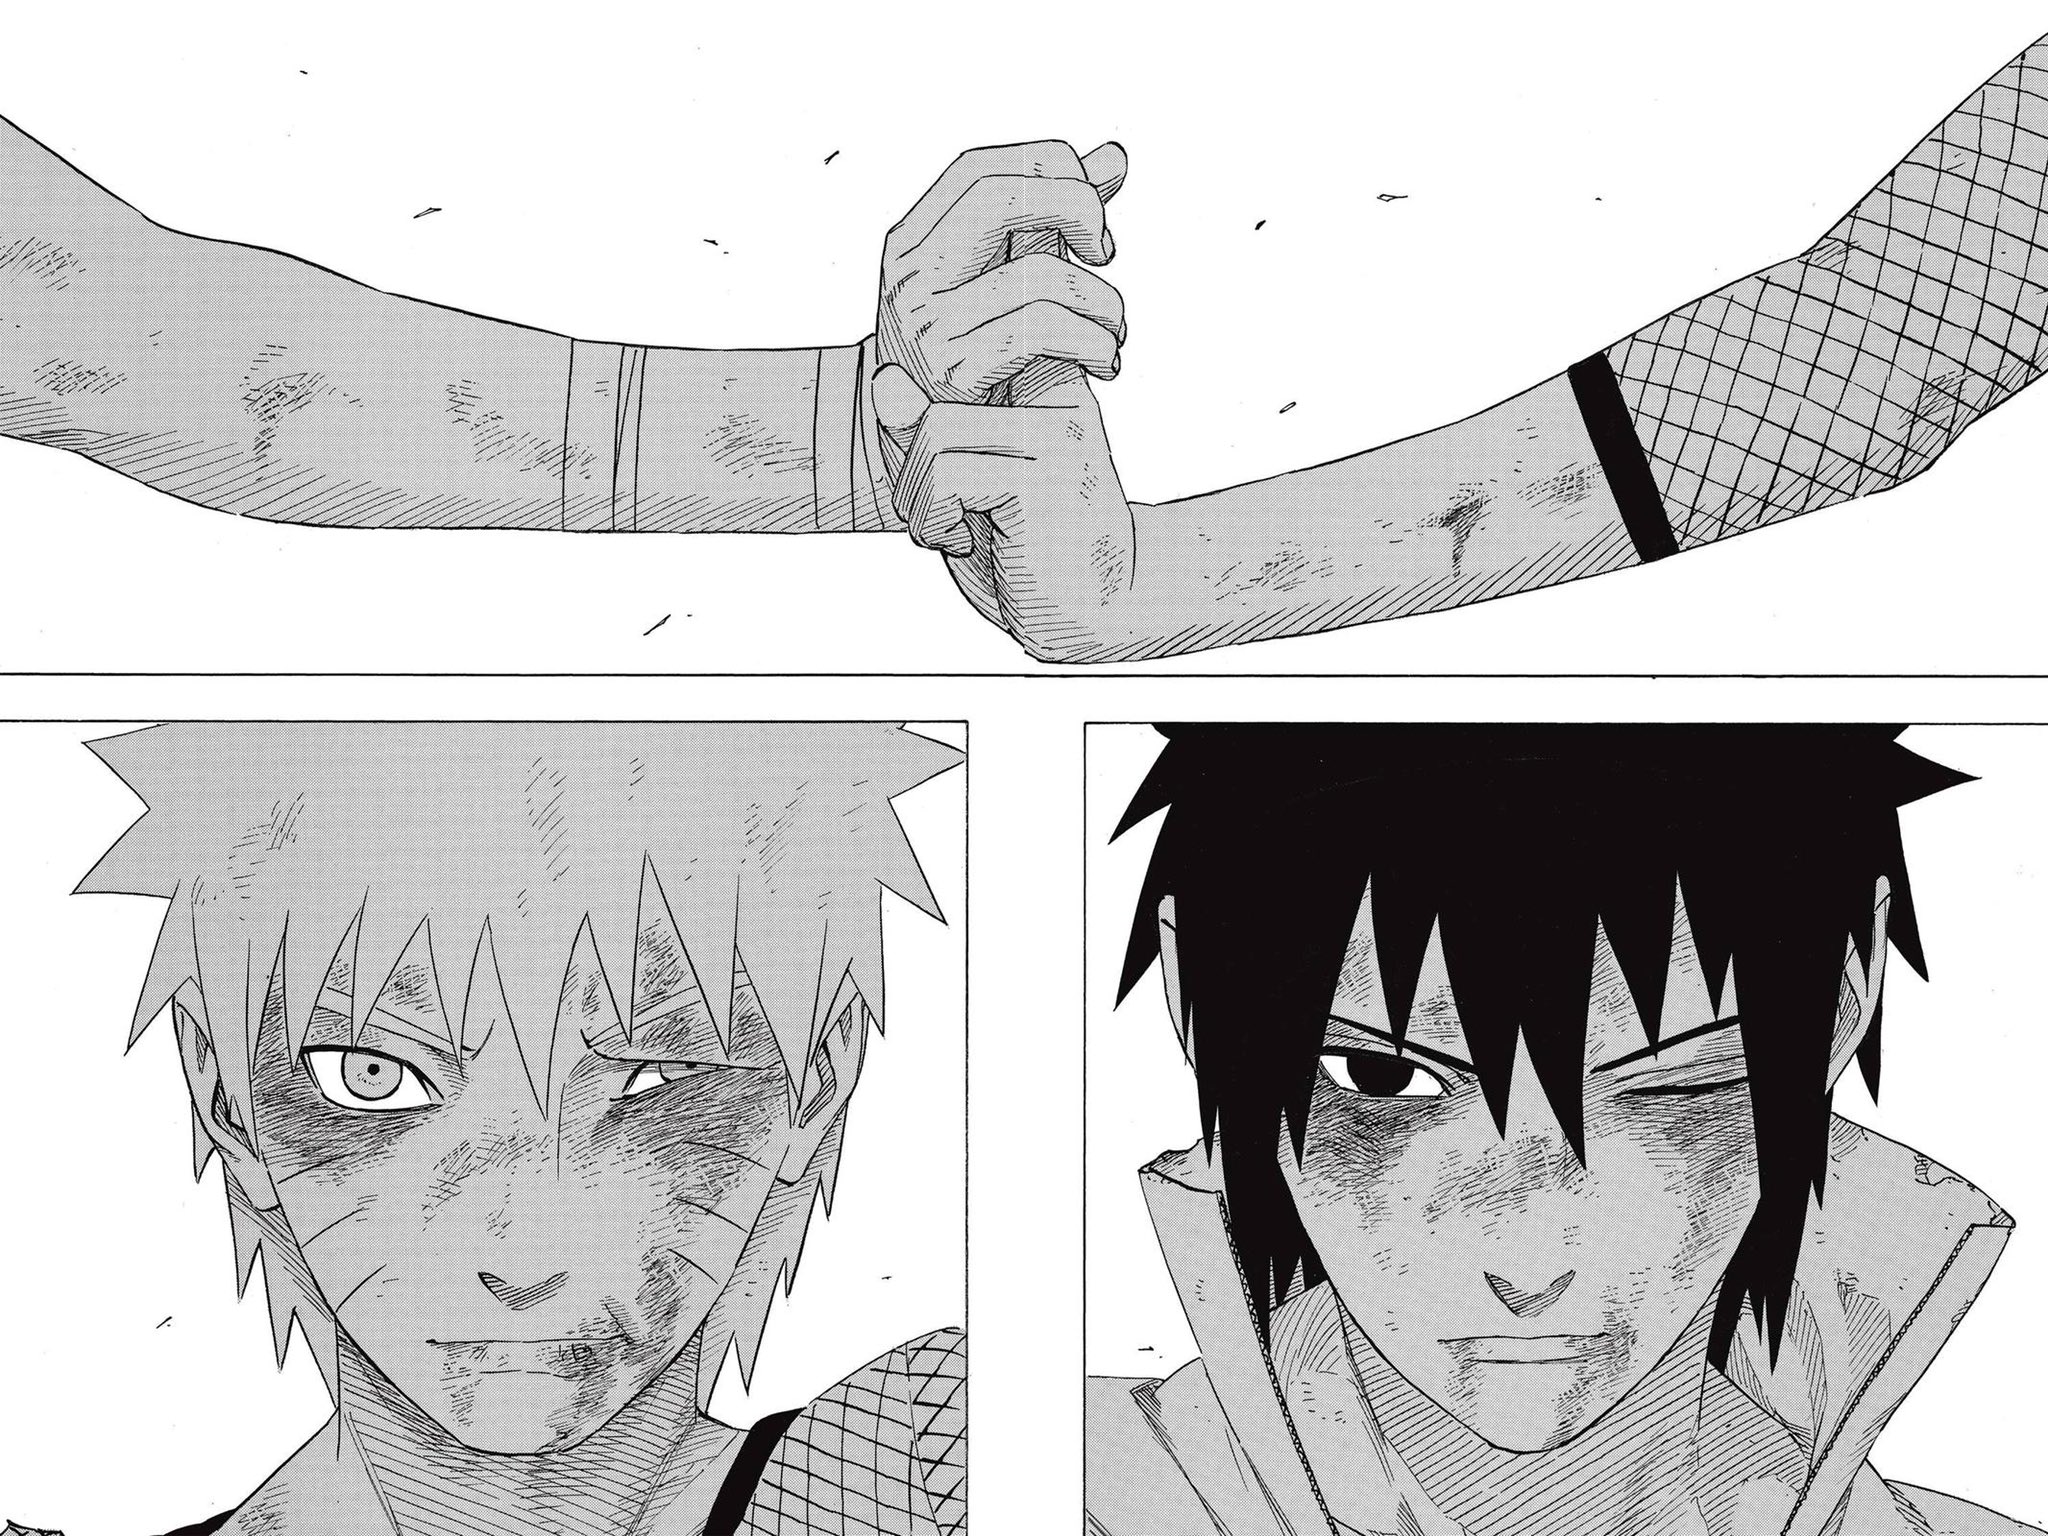 15. Naruto and sasuke's conclusion is one of the best in anime history...